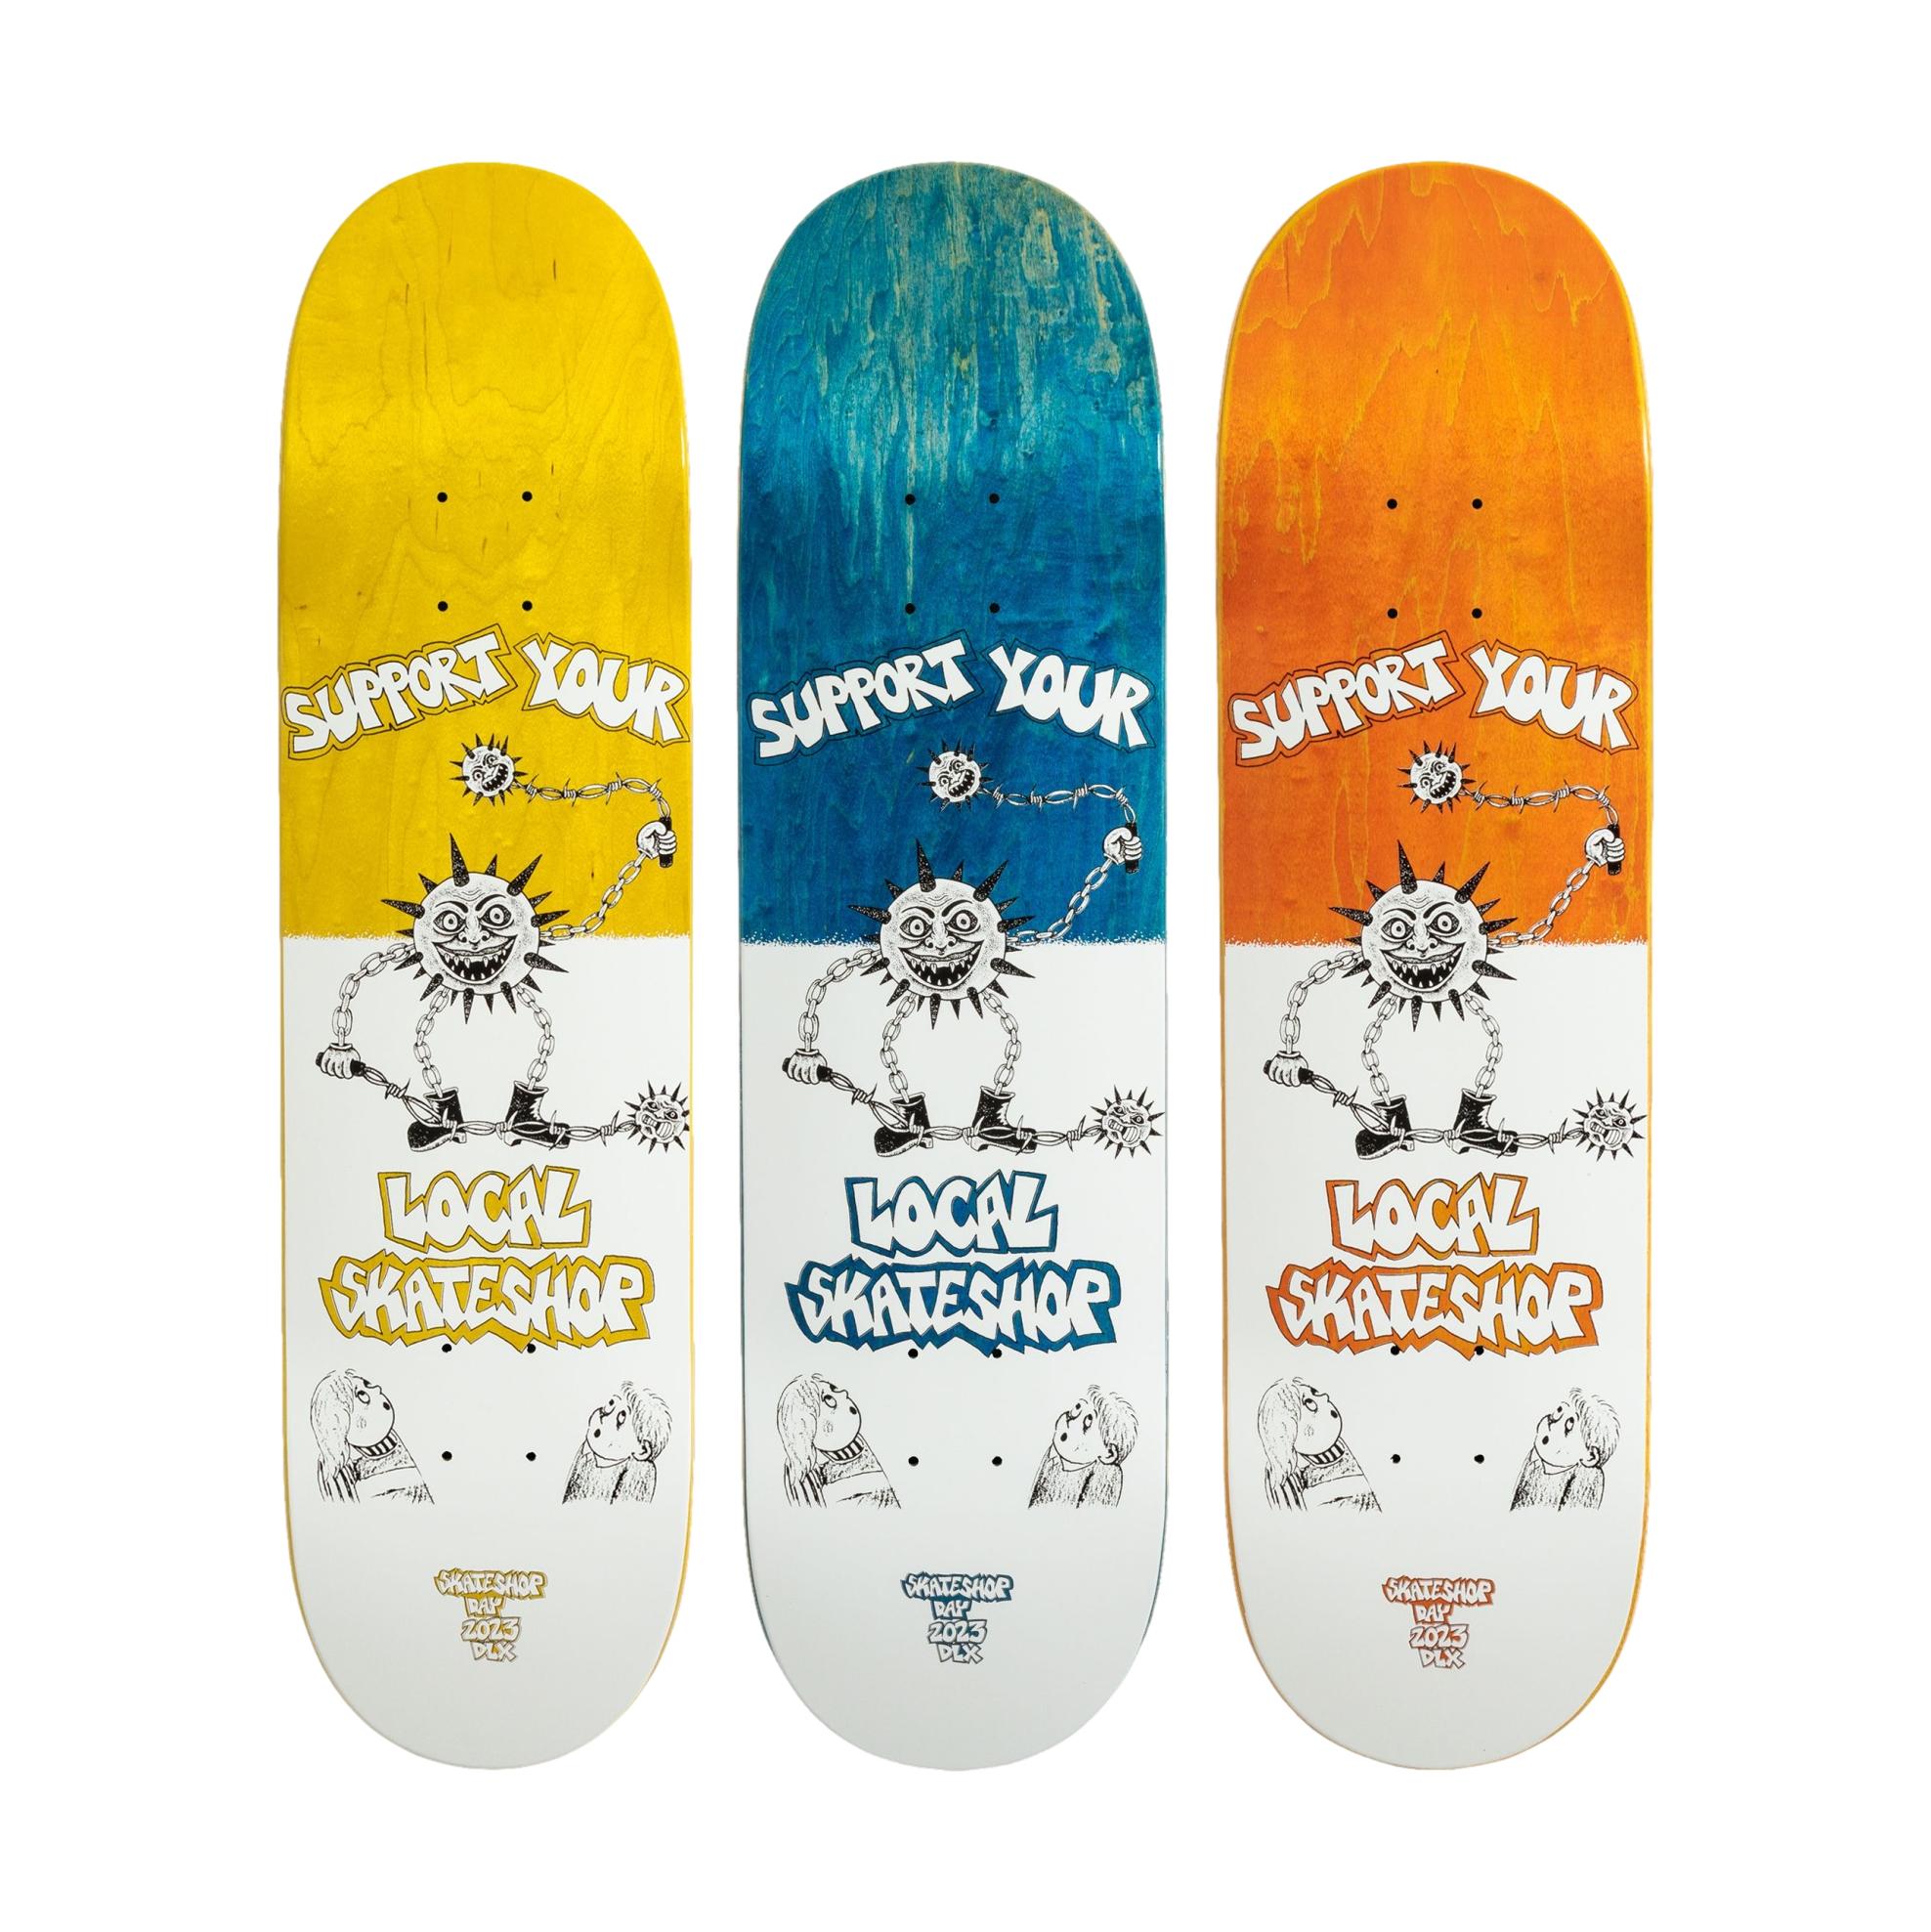 Deluxe Support Your Local Skateshop Day Skateboard Deck 8.5